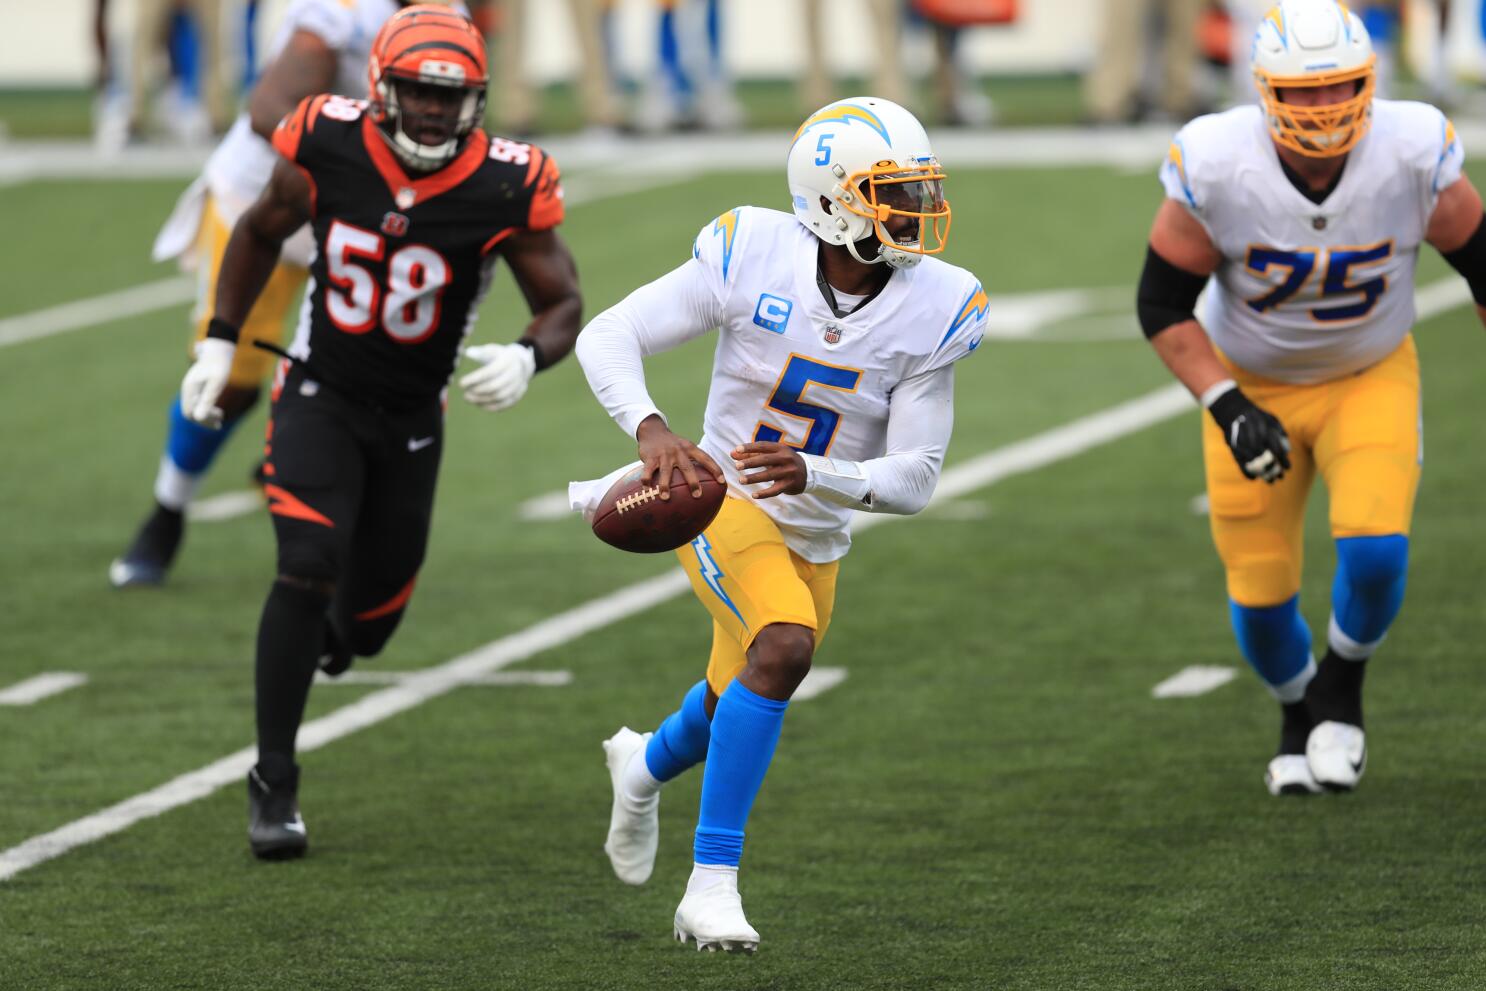 Bengals fall to the Chargers 16-13 in Week 1 of the 2020 NFL season